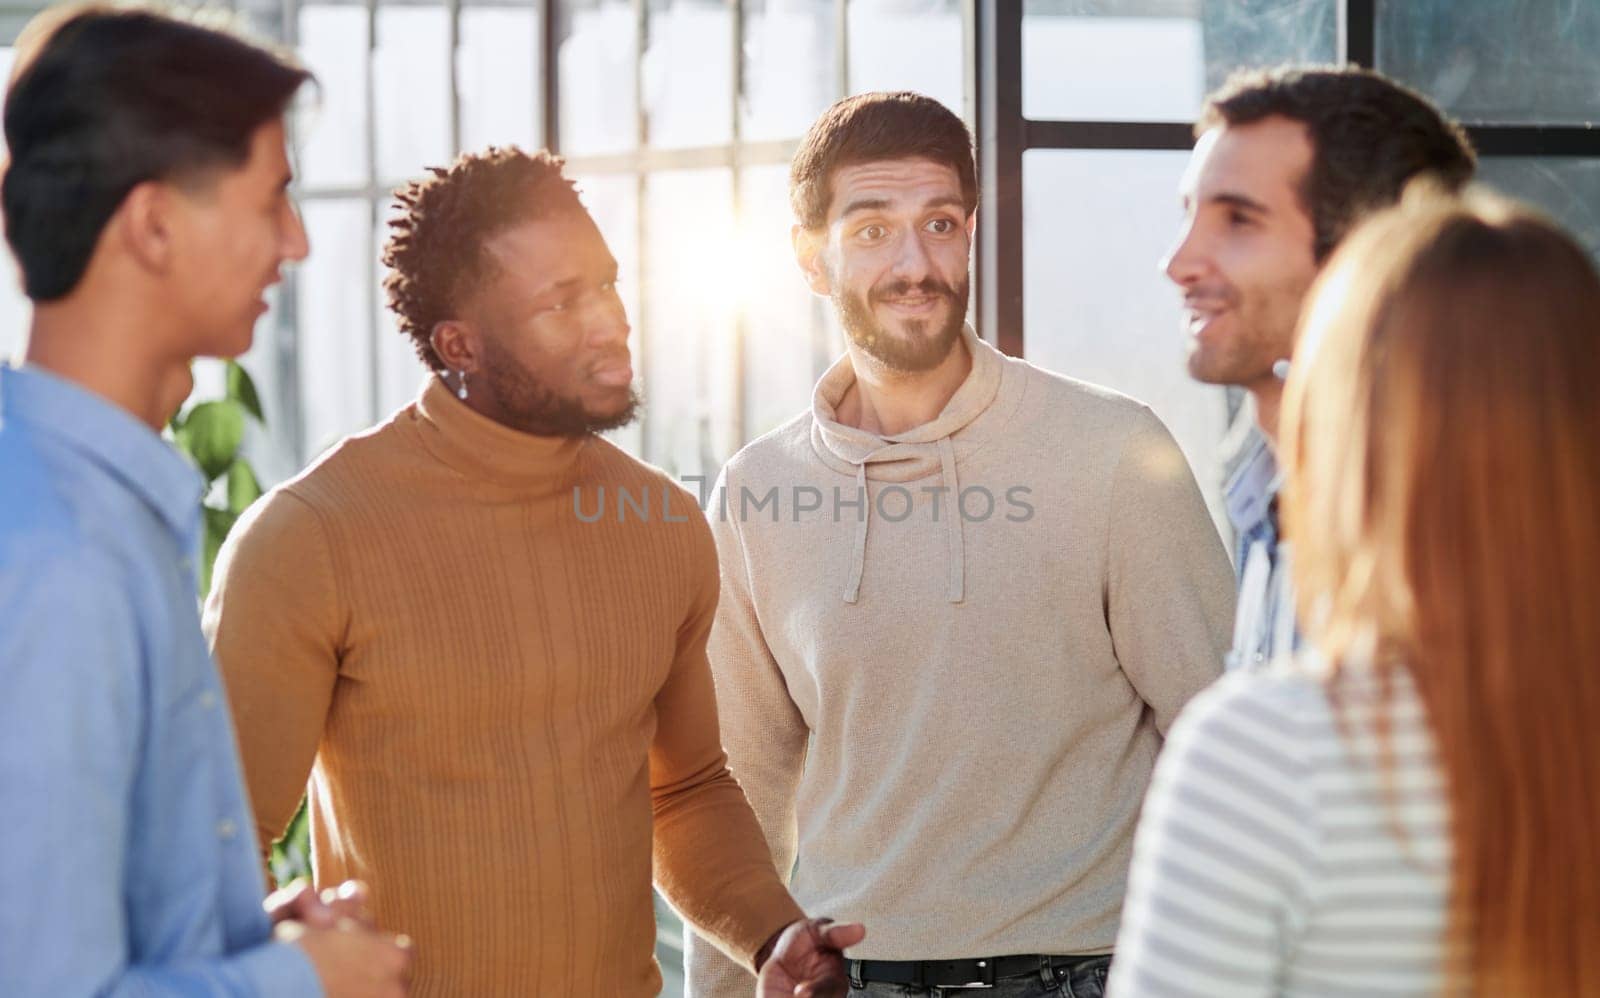 Group portrait of a professional business team having a discussion in the lobby of the office